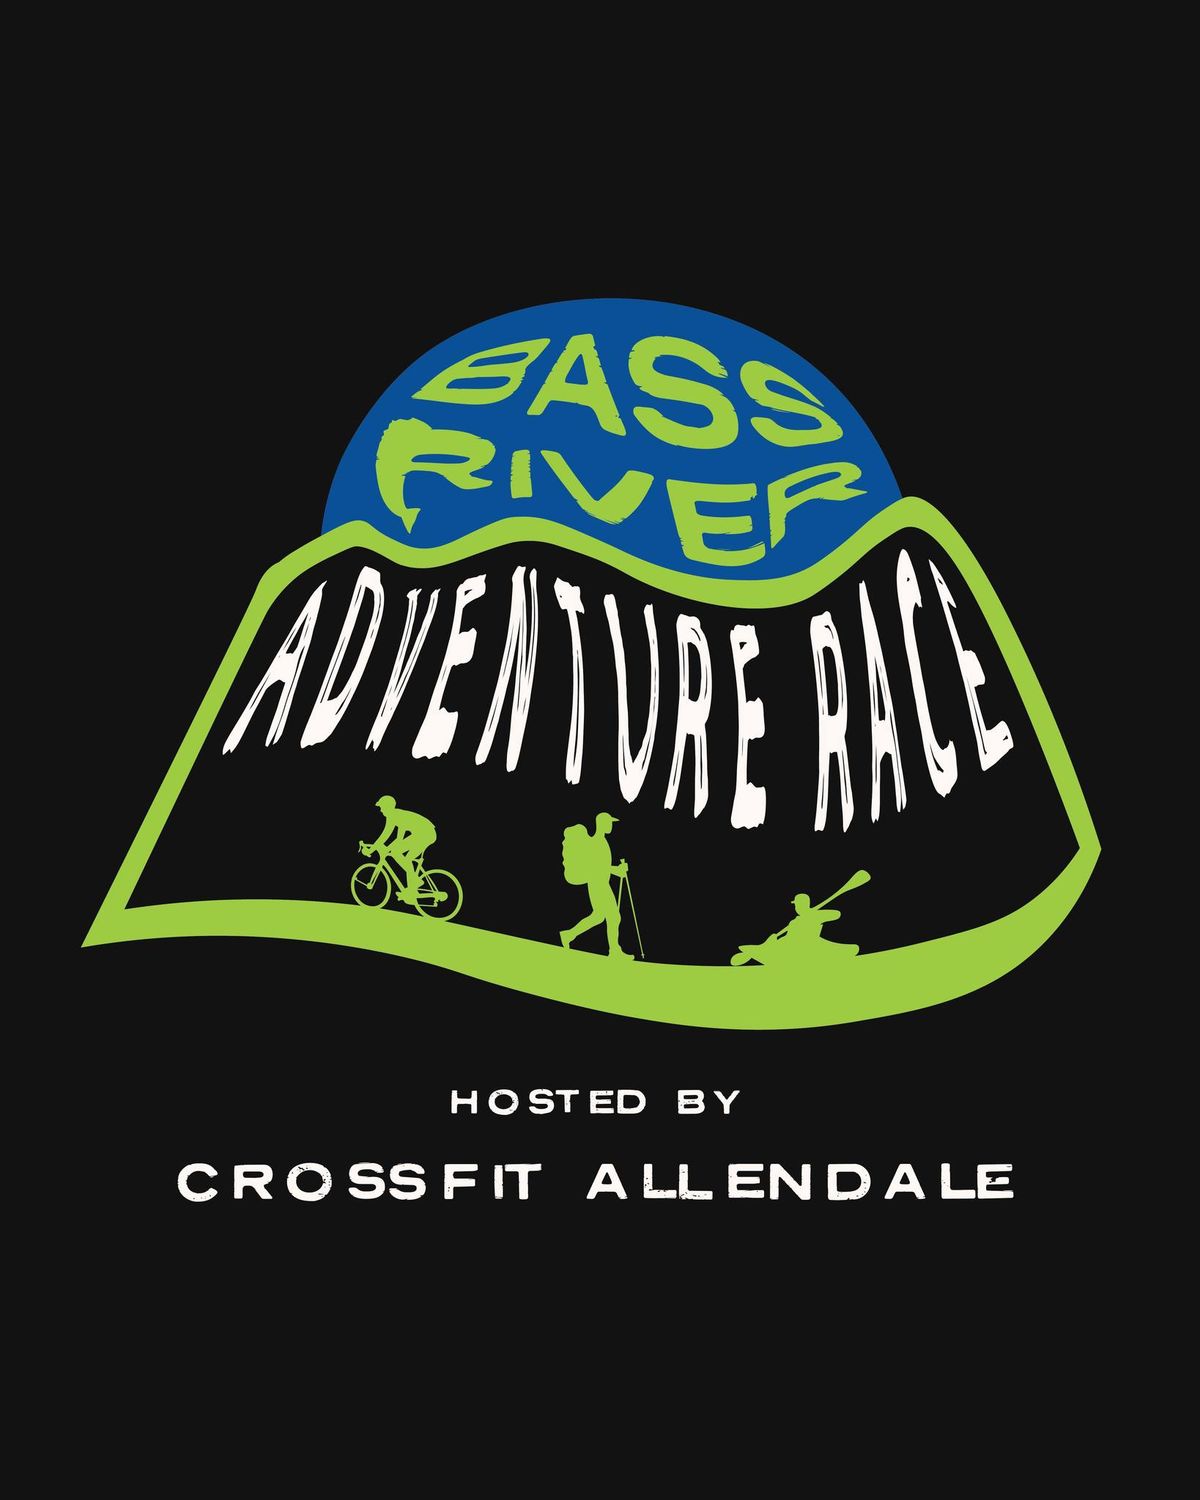 Bass River Adventure Race Hosted by CrossFit Allendale